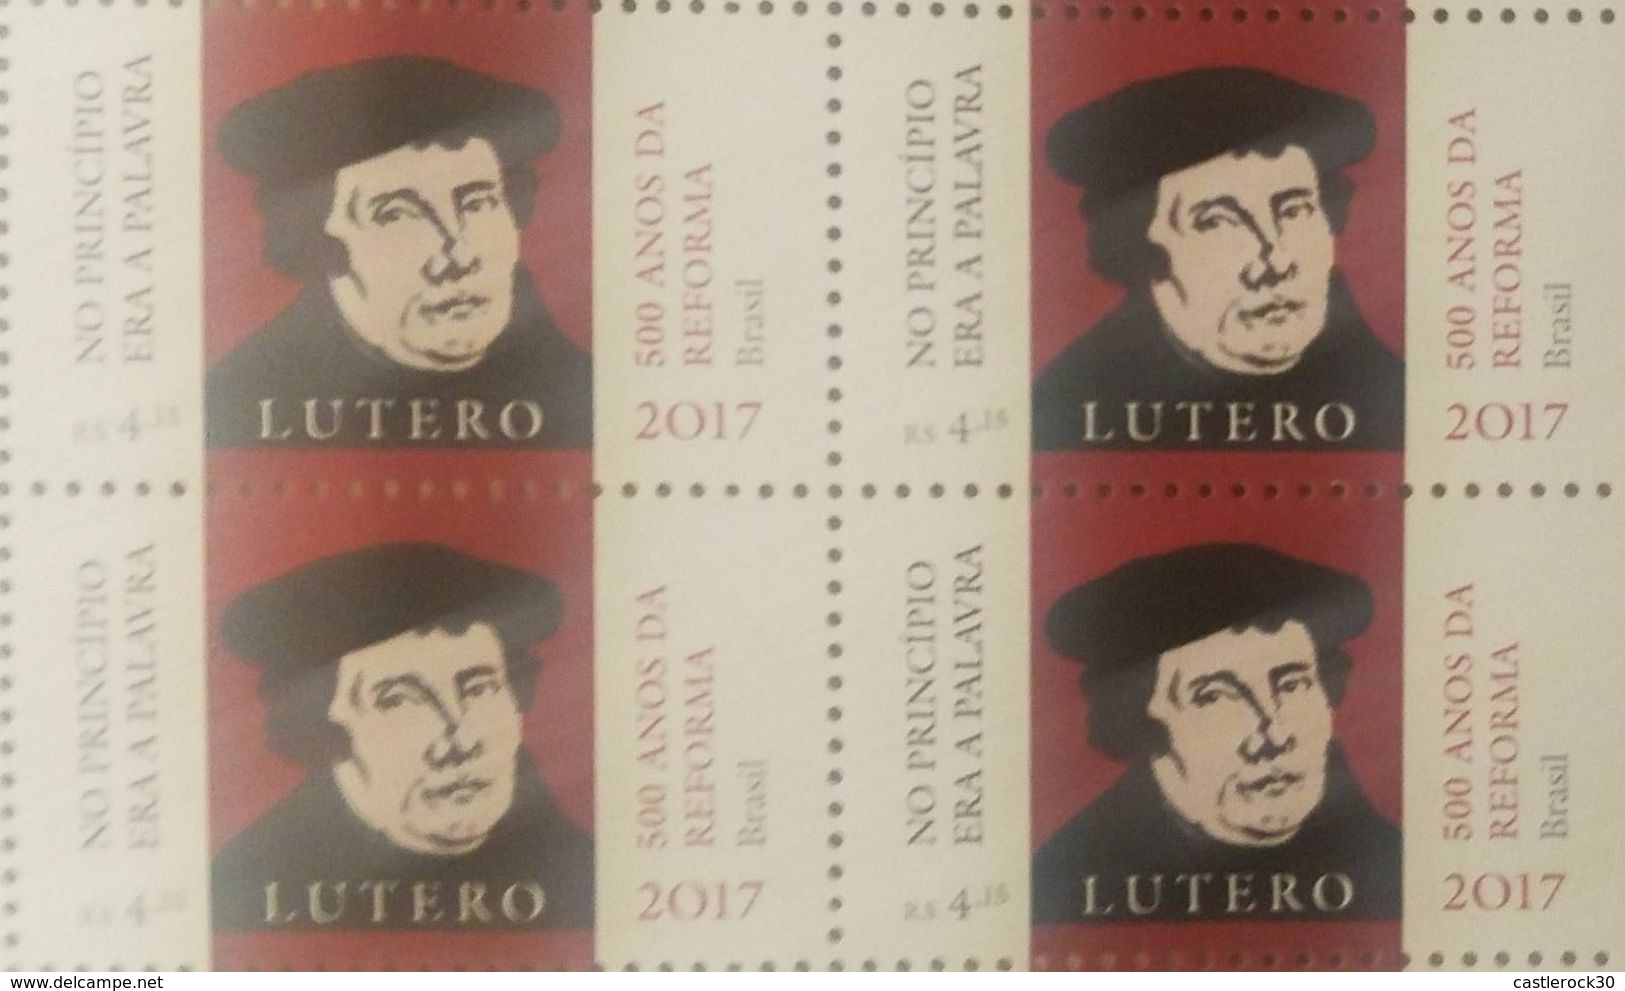 RL) 2017 BRAZIL, IN THE BEGINNING IT WAS THE WORD, MARTIN LUTHER, 500 YEARS OF REFORM, MULTIPLE STAMPS, MNH - Ungebraucht